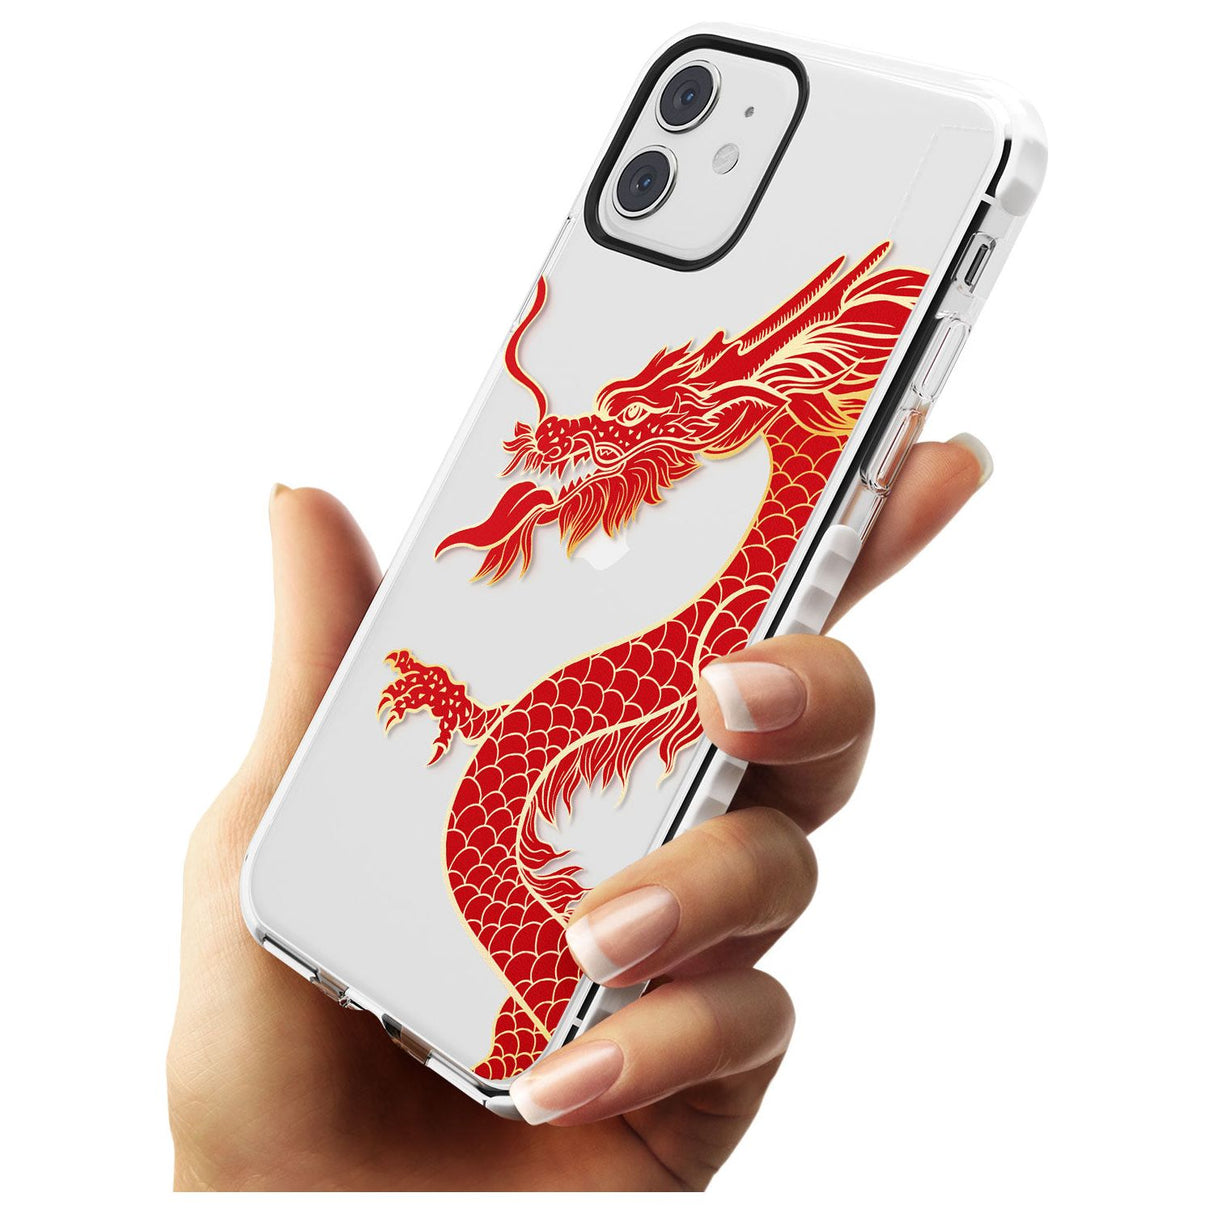 Large Black Dragon Impact Phone Case for iPhone 11